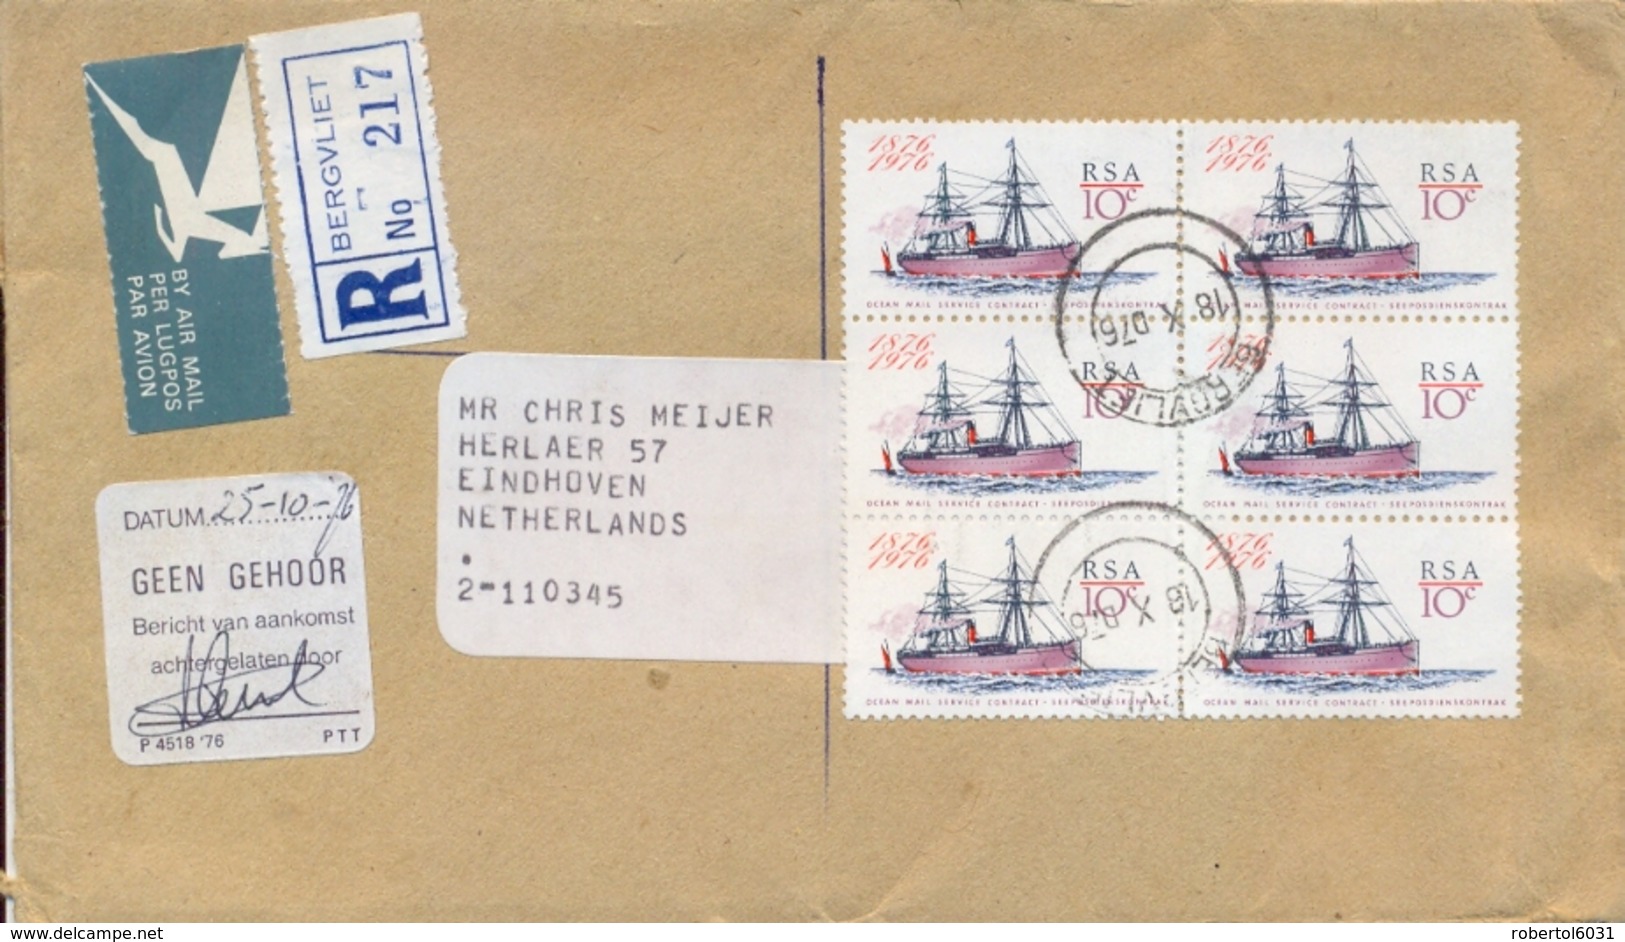 South Africa 1976 Registered Airmail Cover To Netherlands With 6 X 10 C. Centenary Of The Ocean Mail Service - Posta